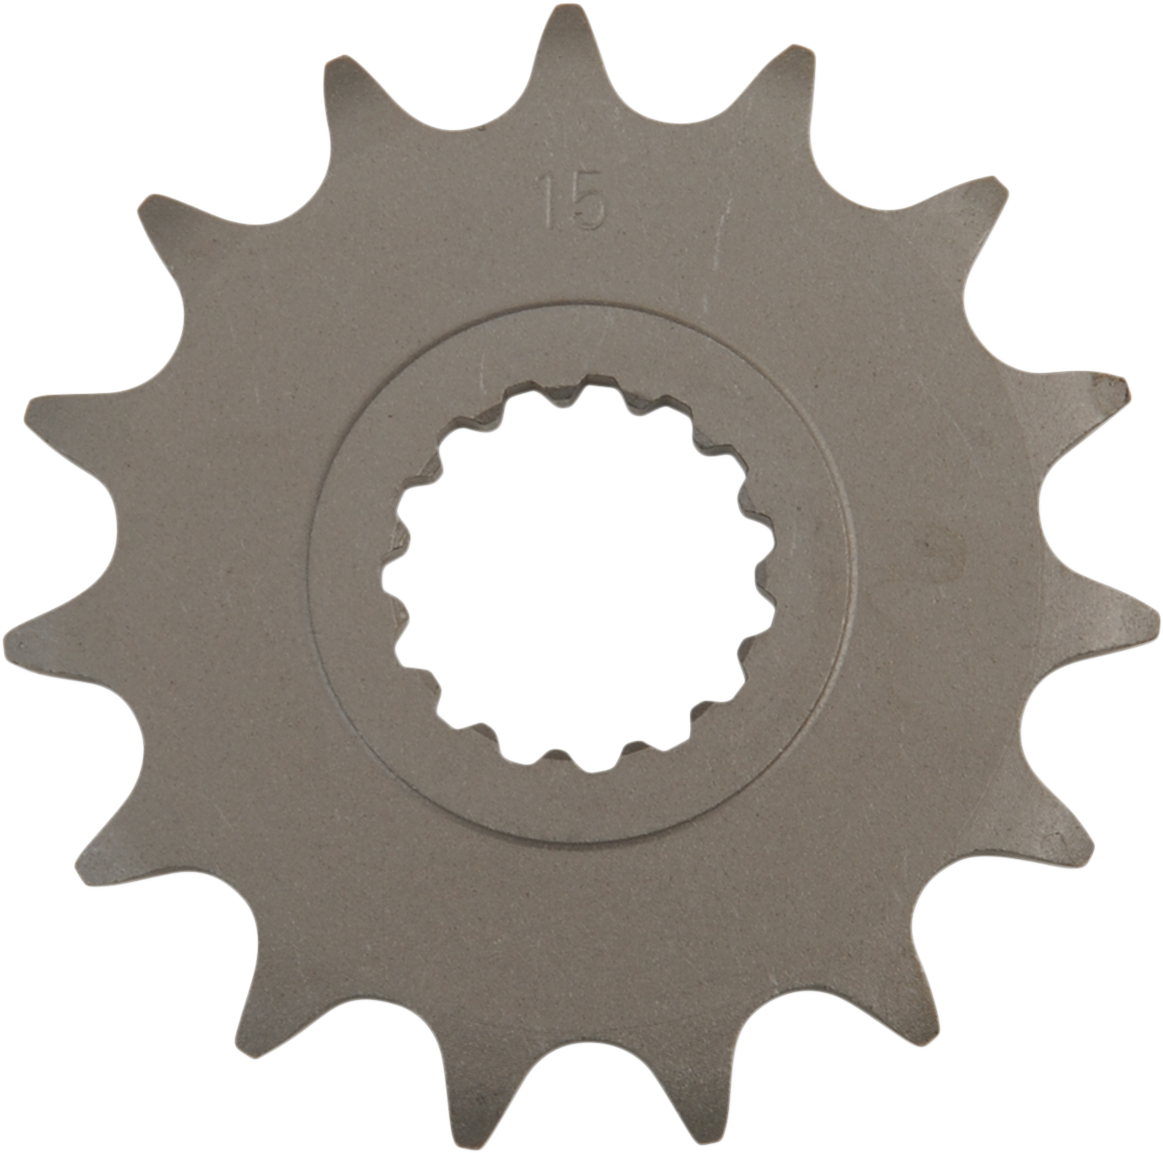 Parts Unlimited Countershaft Sprocket - 15-Tooth 9383g142310015